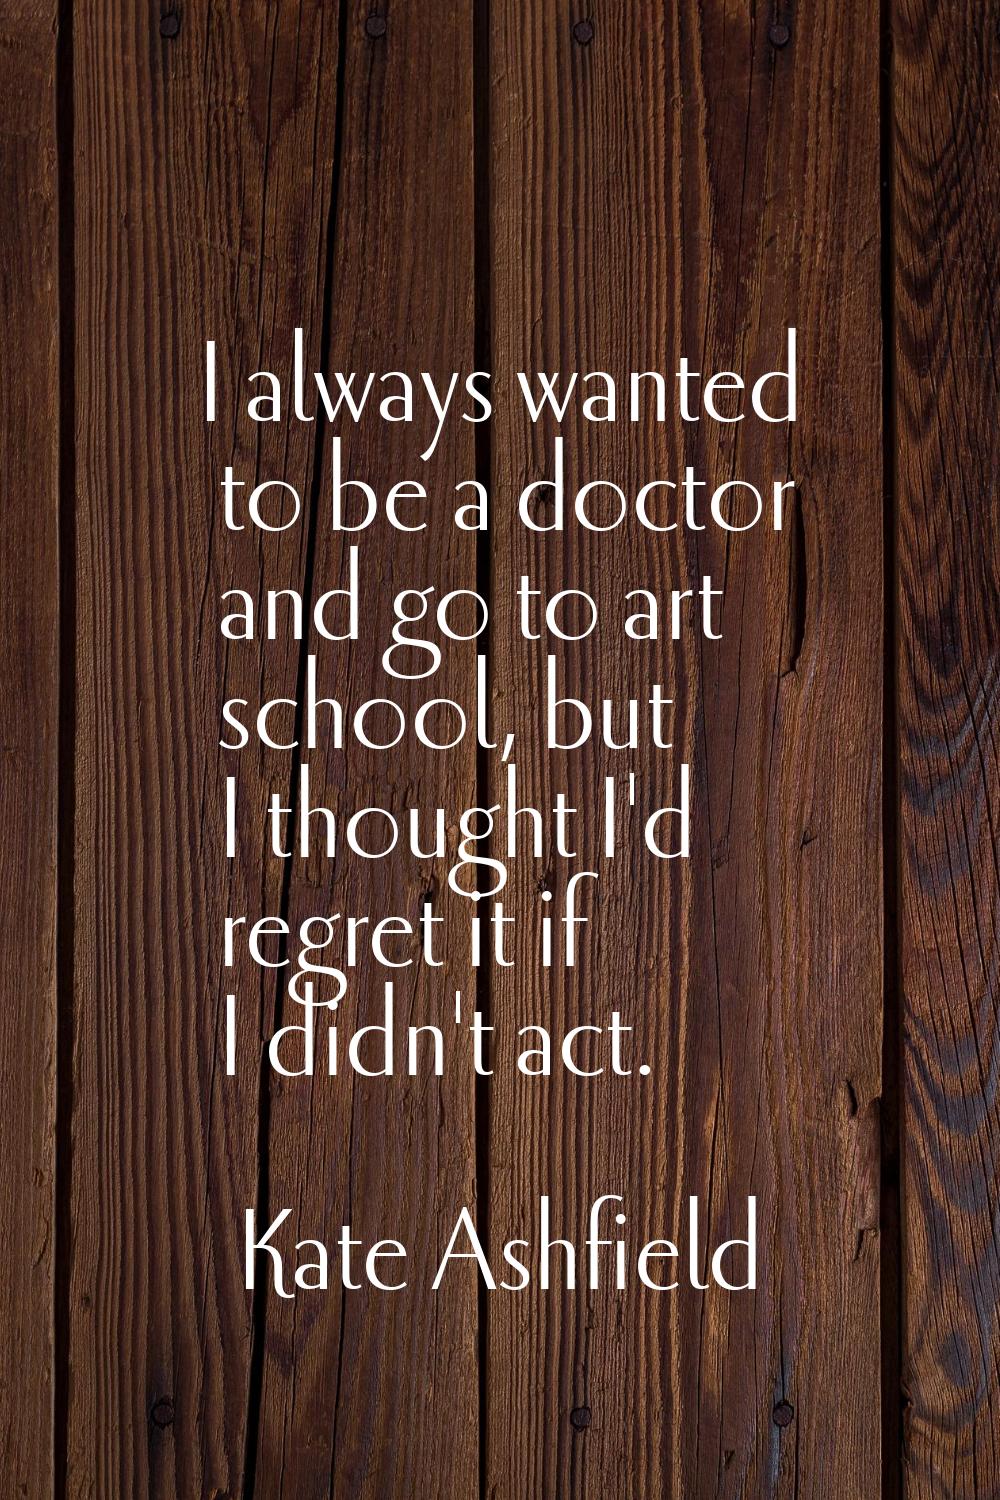 I always wanted to be a doctor and go to art school, but I thought I'd regret it if I didn't act.